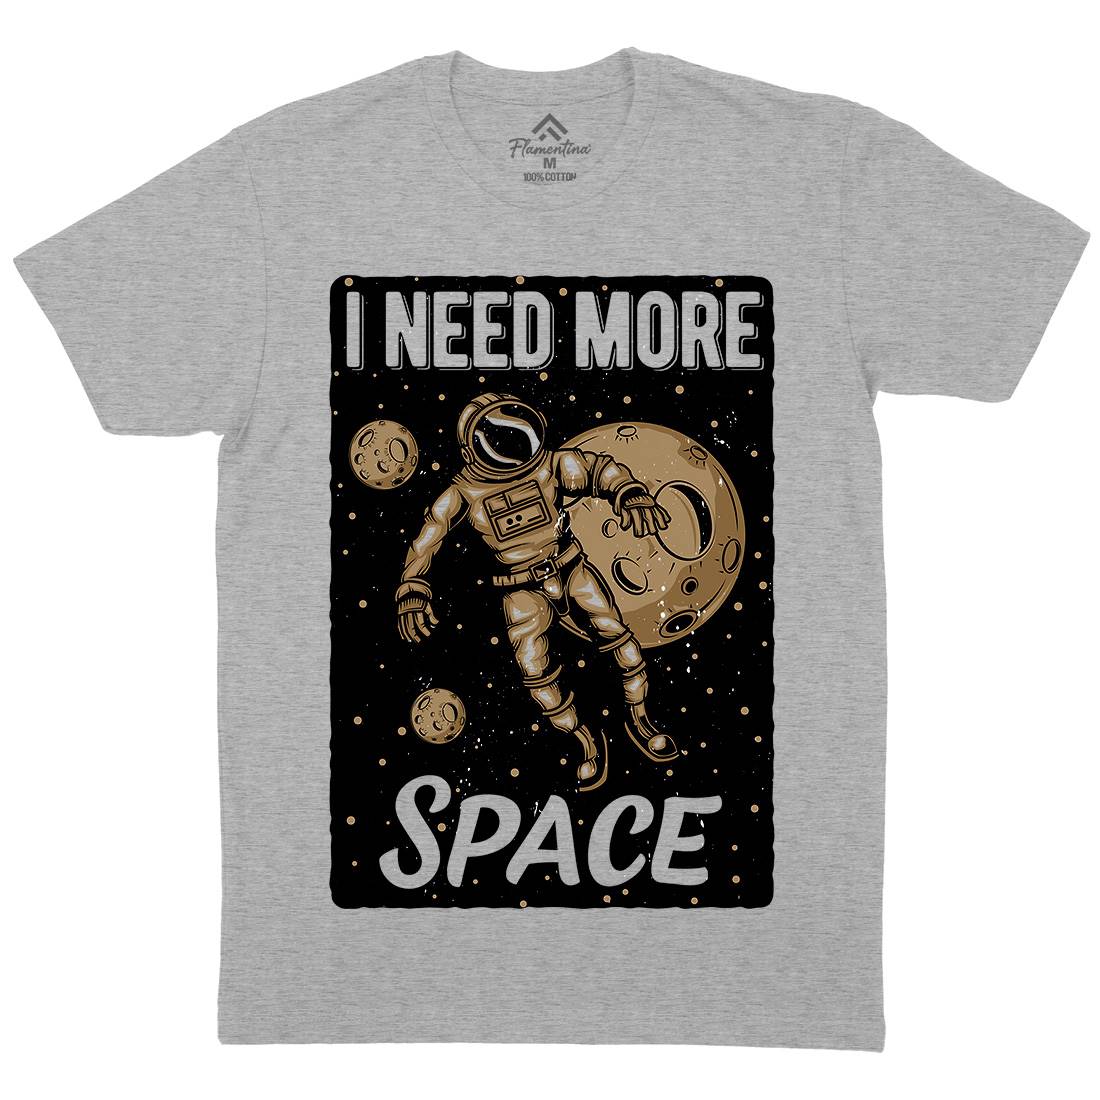 Need More Mens Crew Neck T-Shirt Space B168